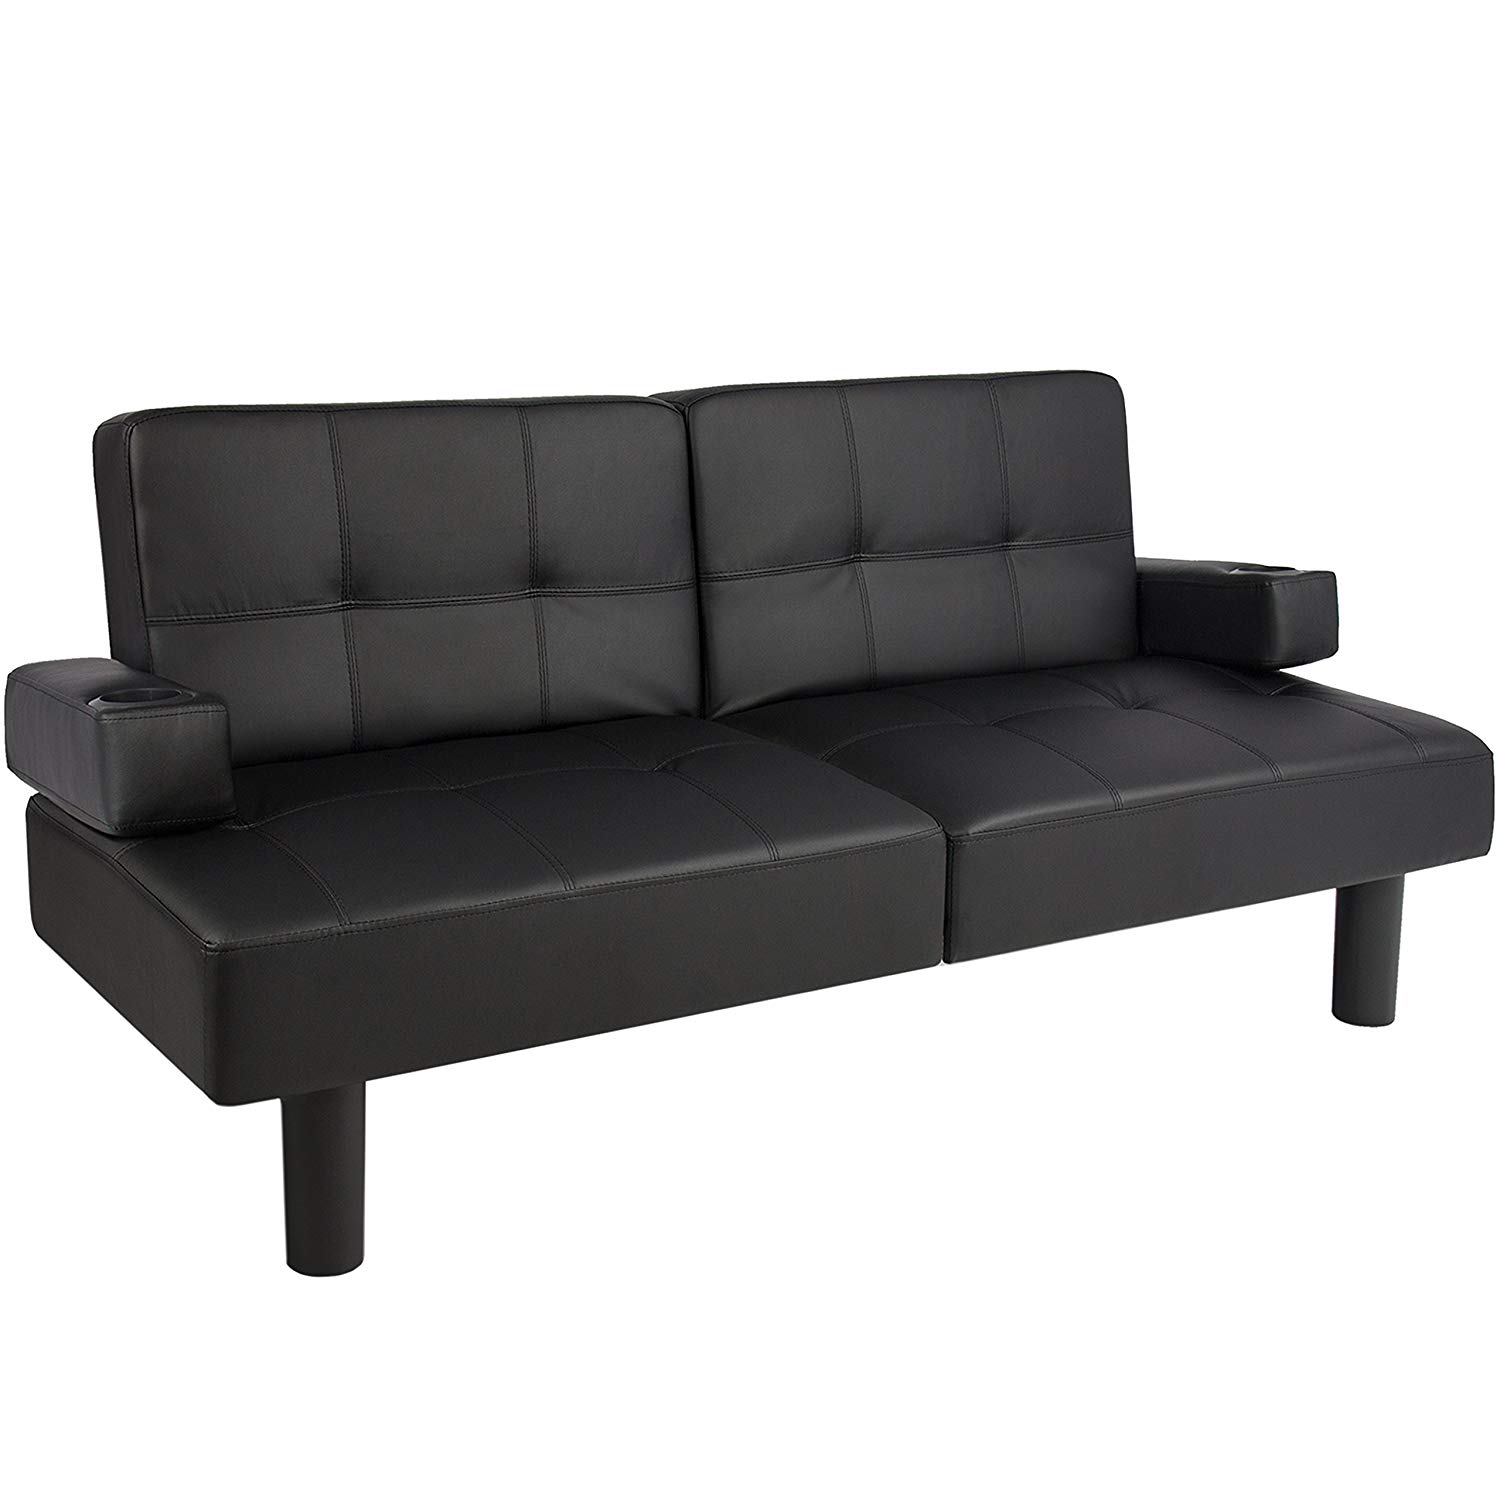 futon couch amazon.com: best selection products leather faux foldable futon lounge convertible RFFFTGB